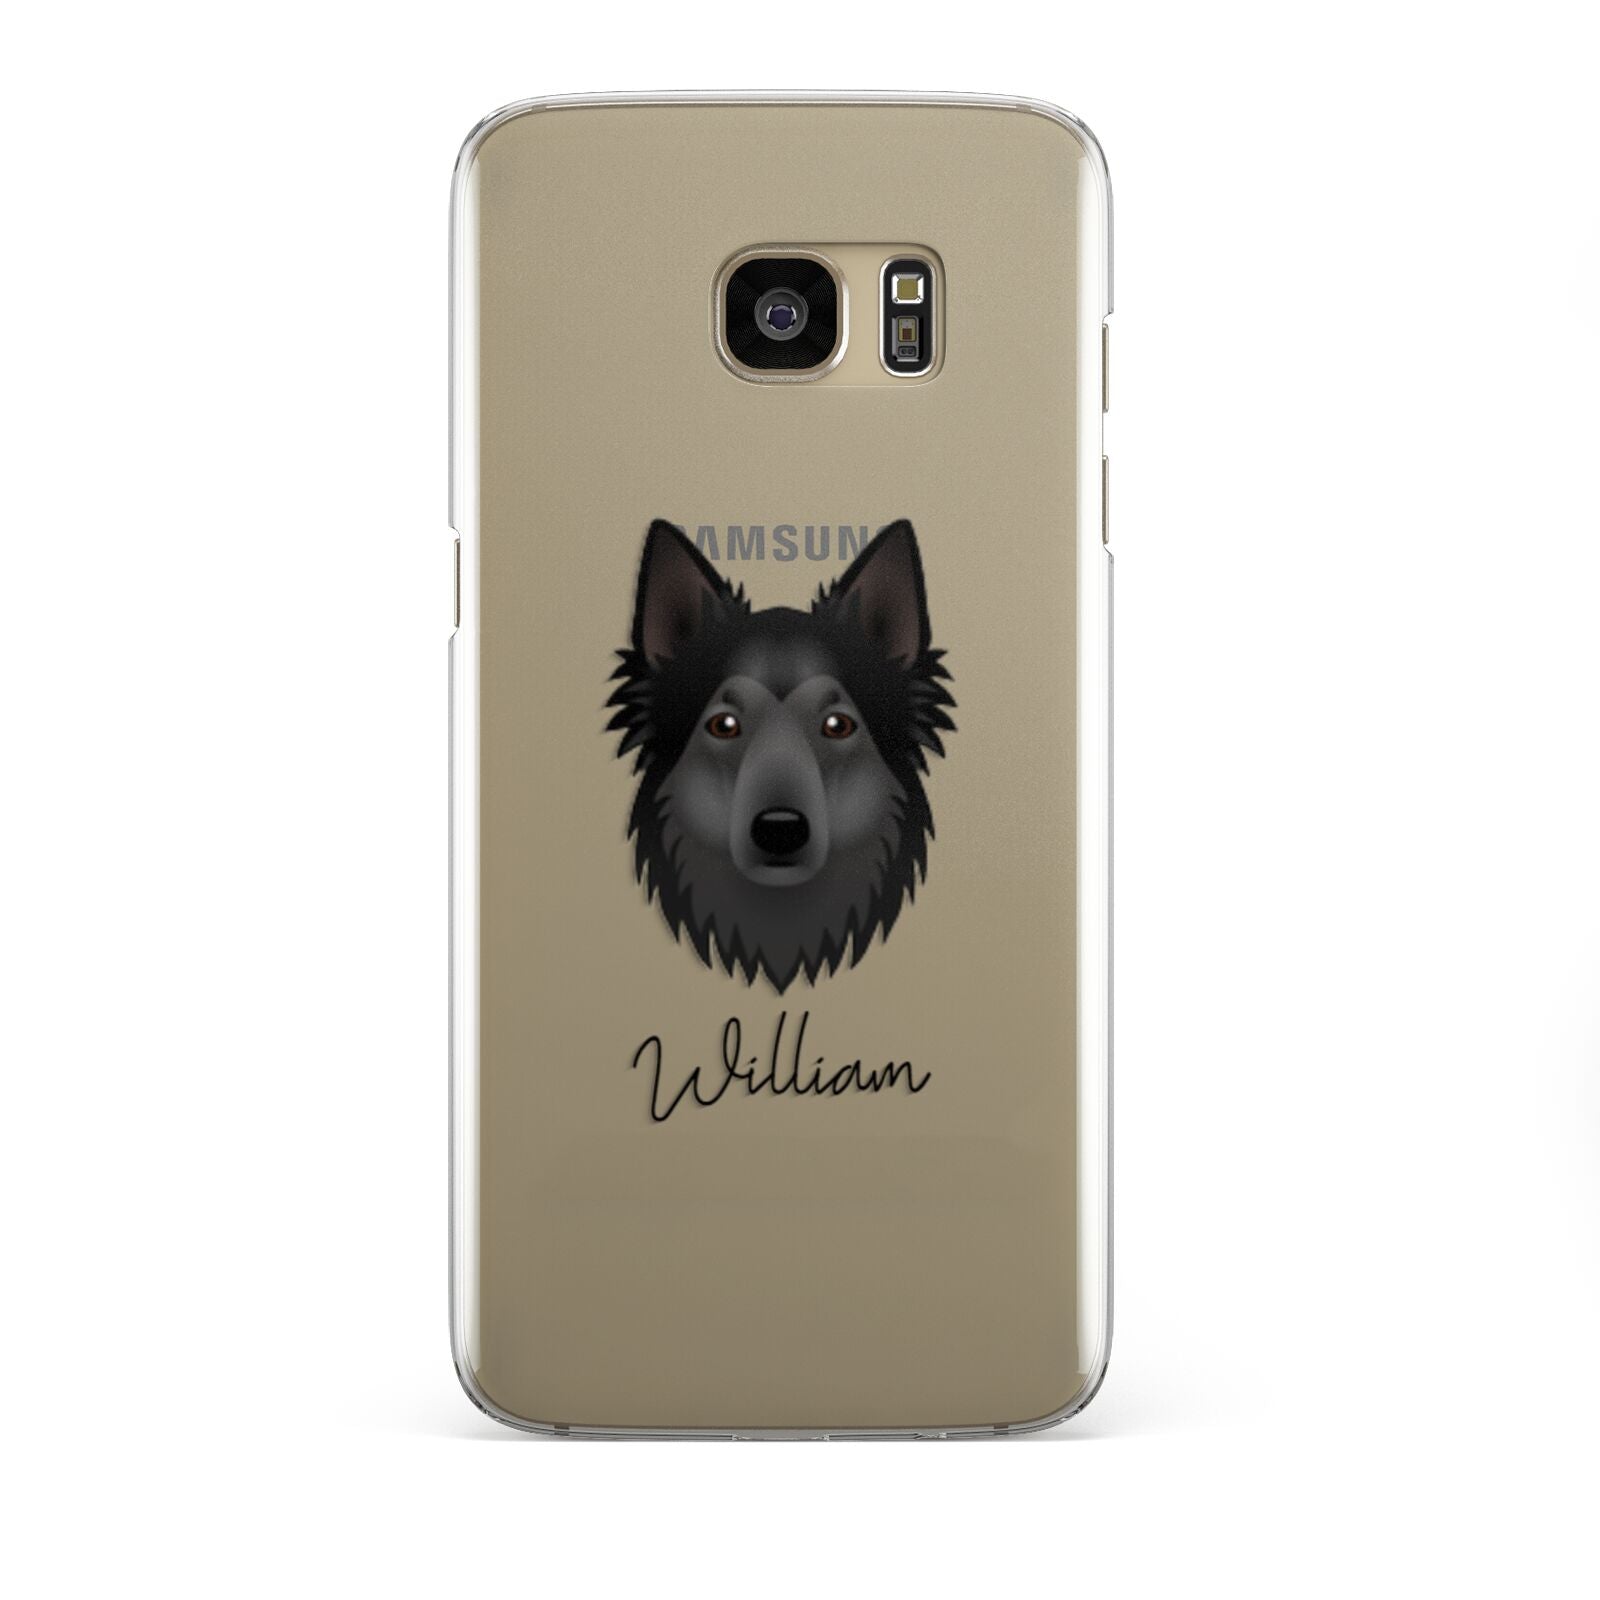 Shollie Personalised Samsung Galaxy S7 Edge Case